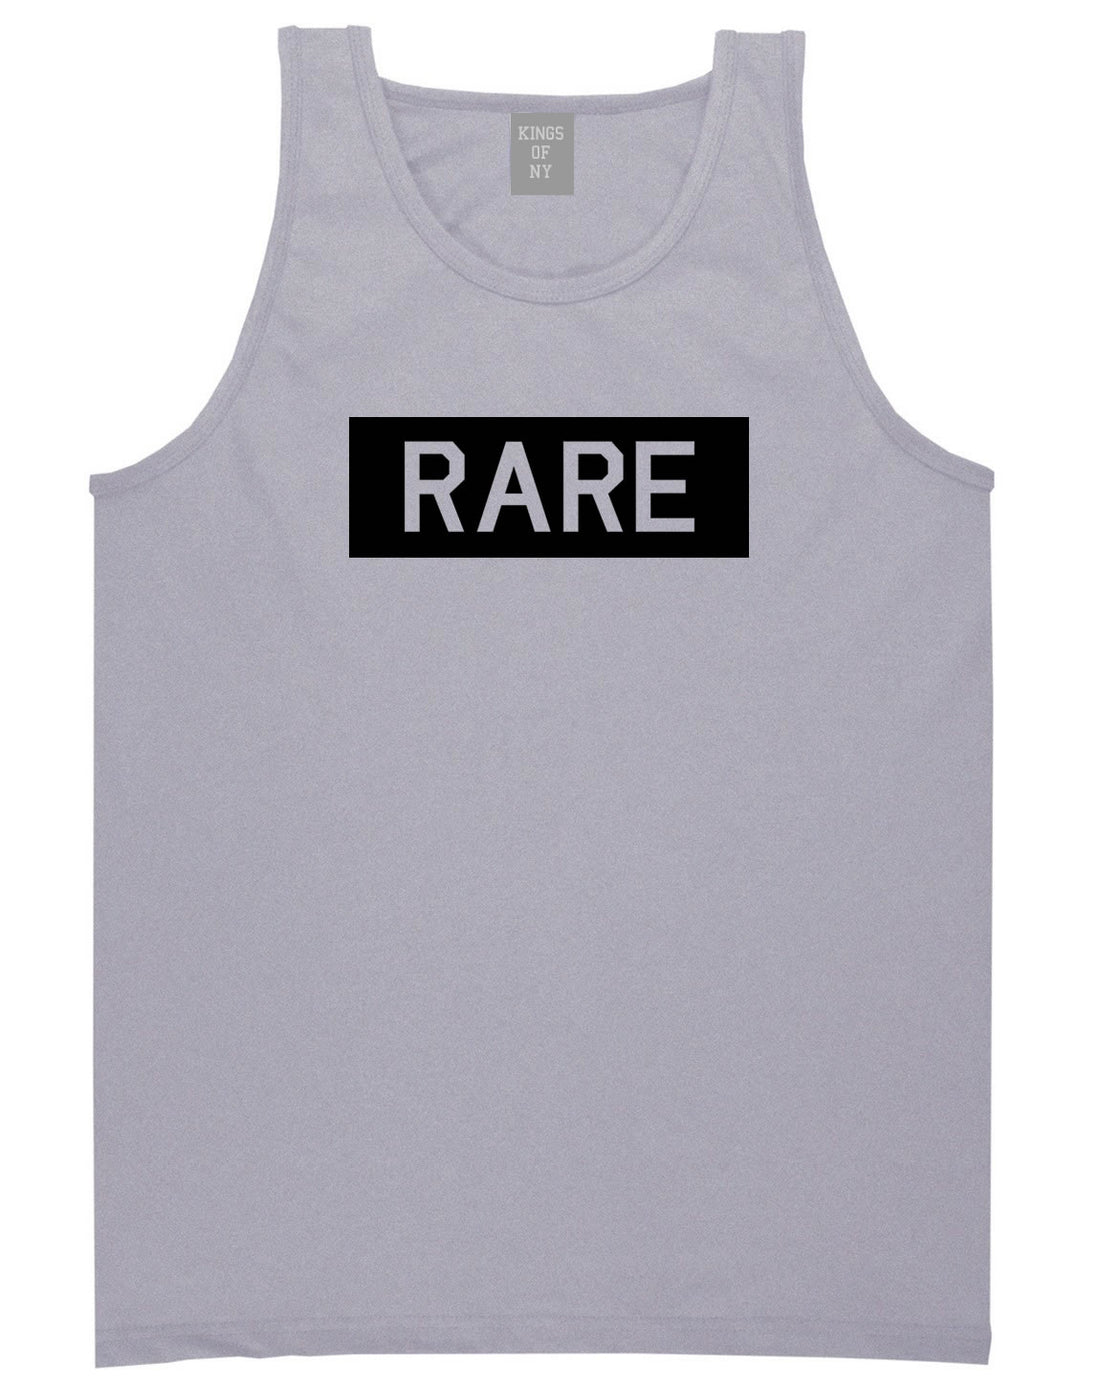 Rare College Block Tank Top in Grey by Kings Of NY